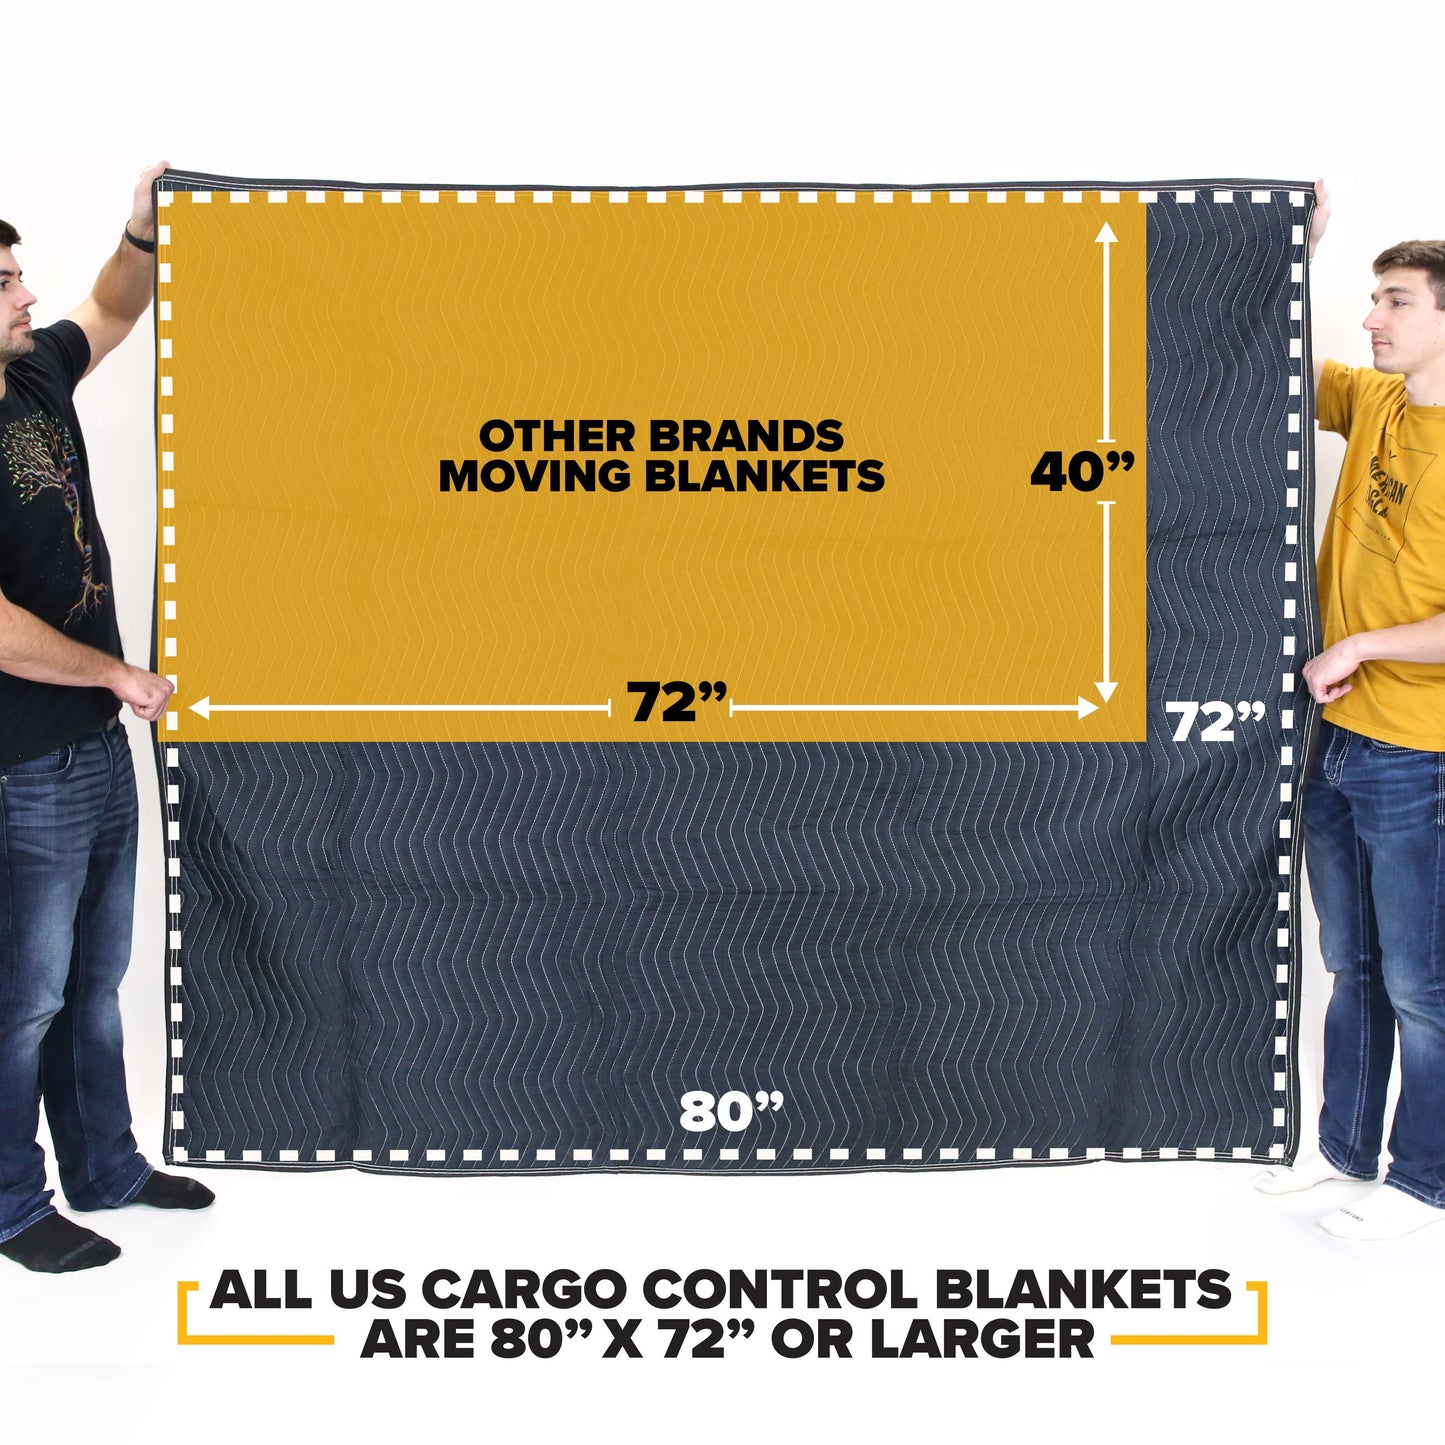 Moving Blankets- Pro Mover 12-Pack, 82 lbs./dozen image 4 of 11